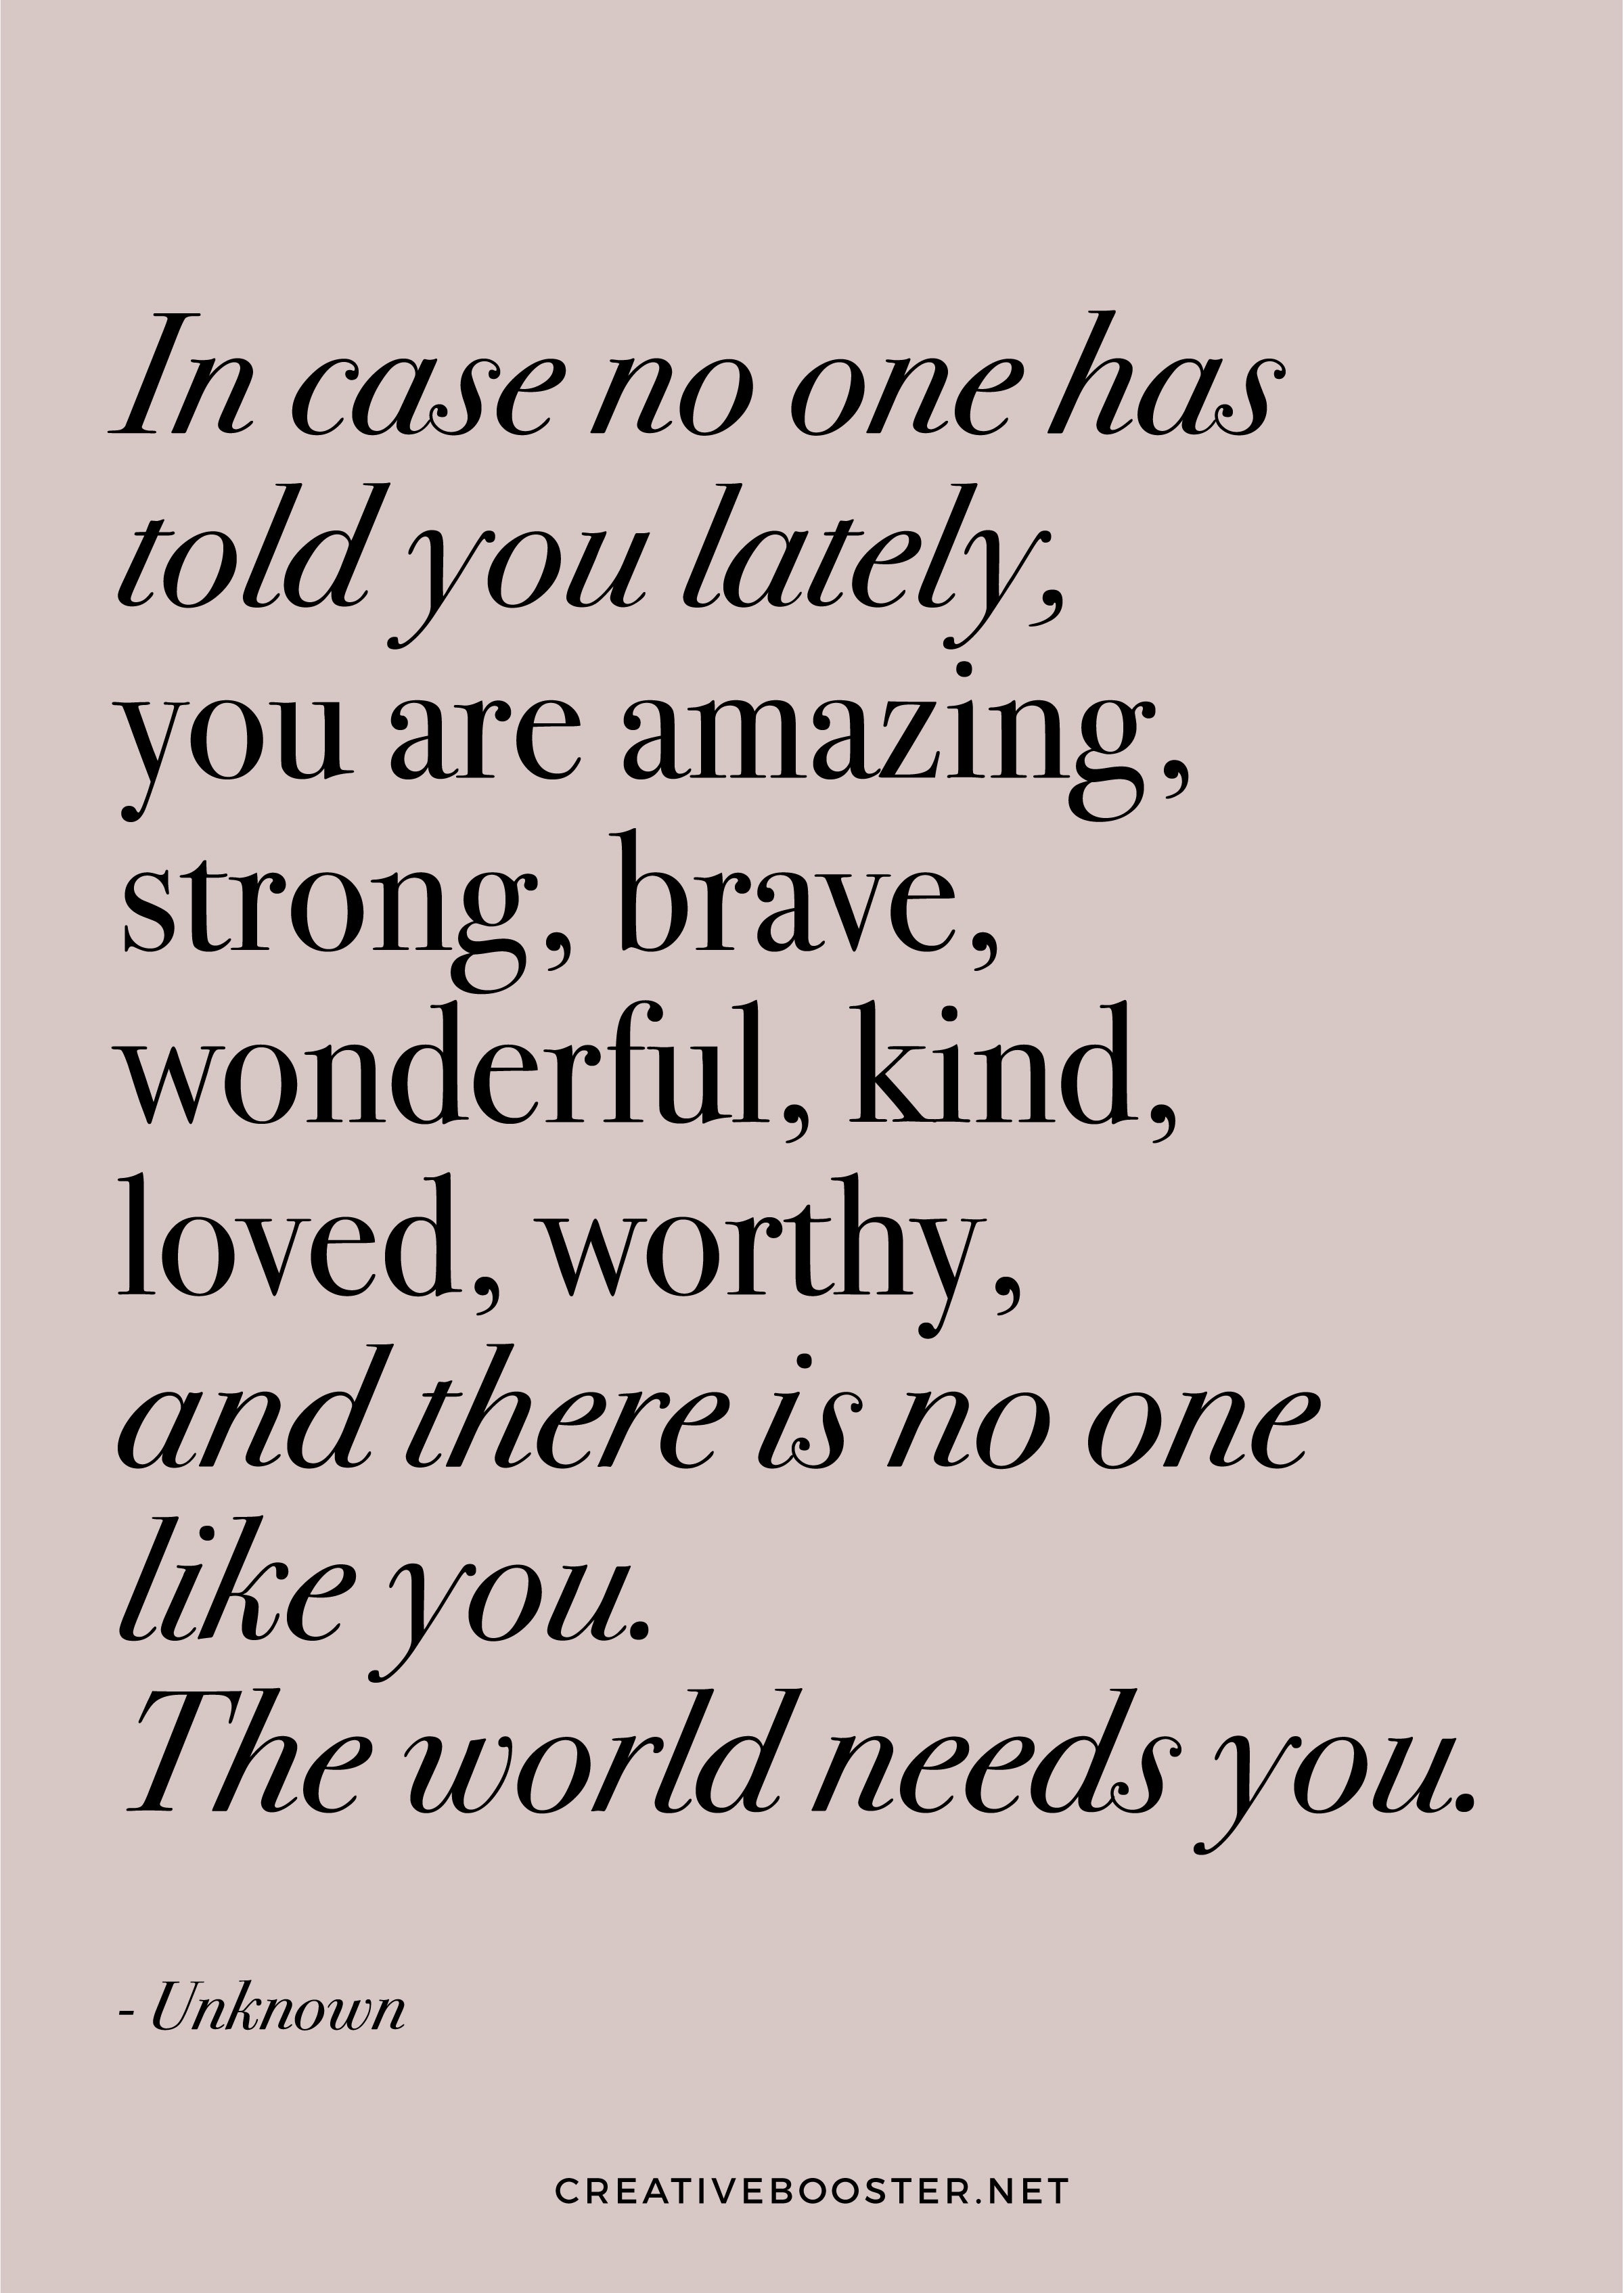 Inspirational-You-Are-Amazing-Quotes---“In-case-no-one-has-told-you-lately,-you-are-amazing,-strong,-brave,-wonderful,-kind,-loved,-worthy,-and-there-is-no-one-like-you.-The-world-needs-you.”-–-Unknown-(Quote-Art-Print)